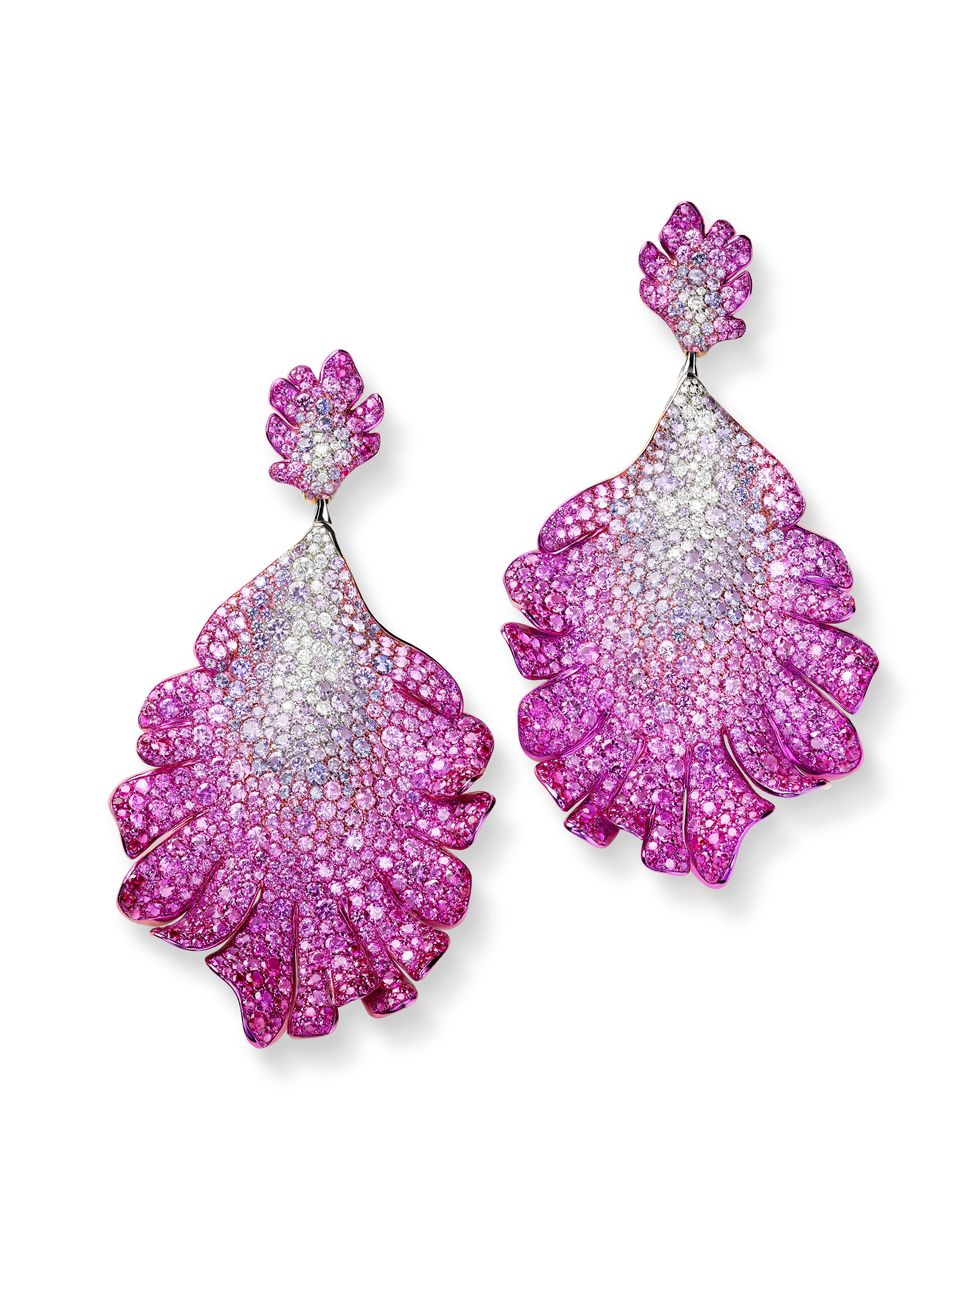 chopard red carpet collection earrings